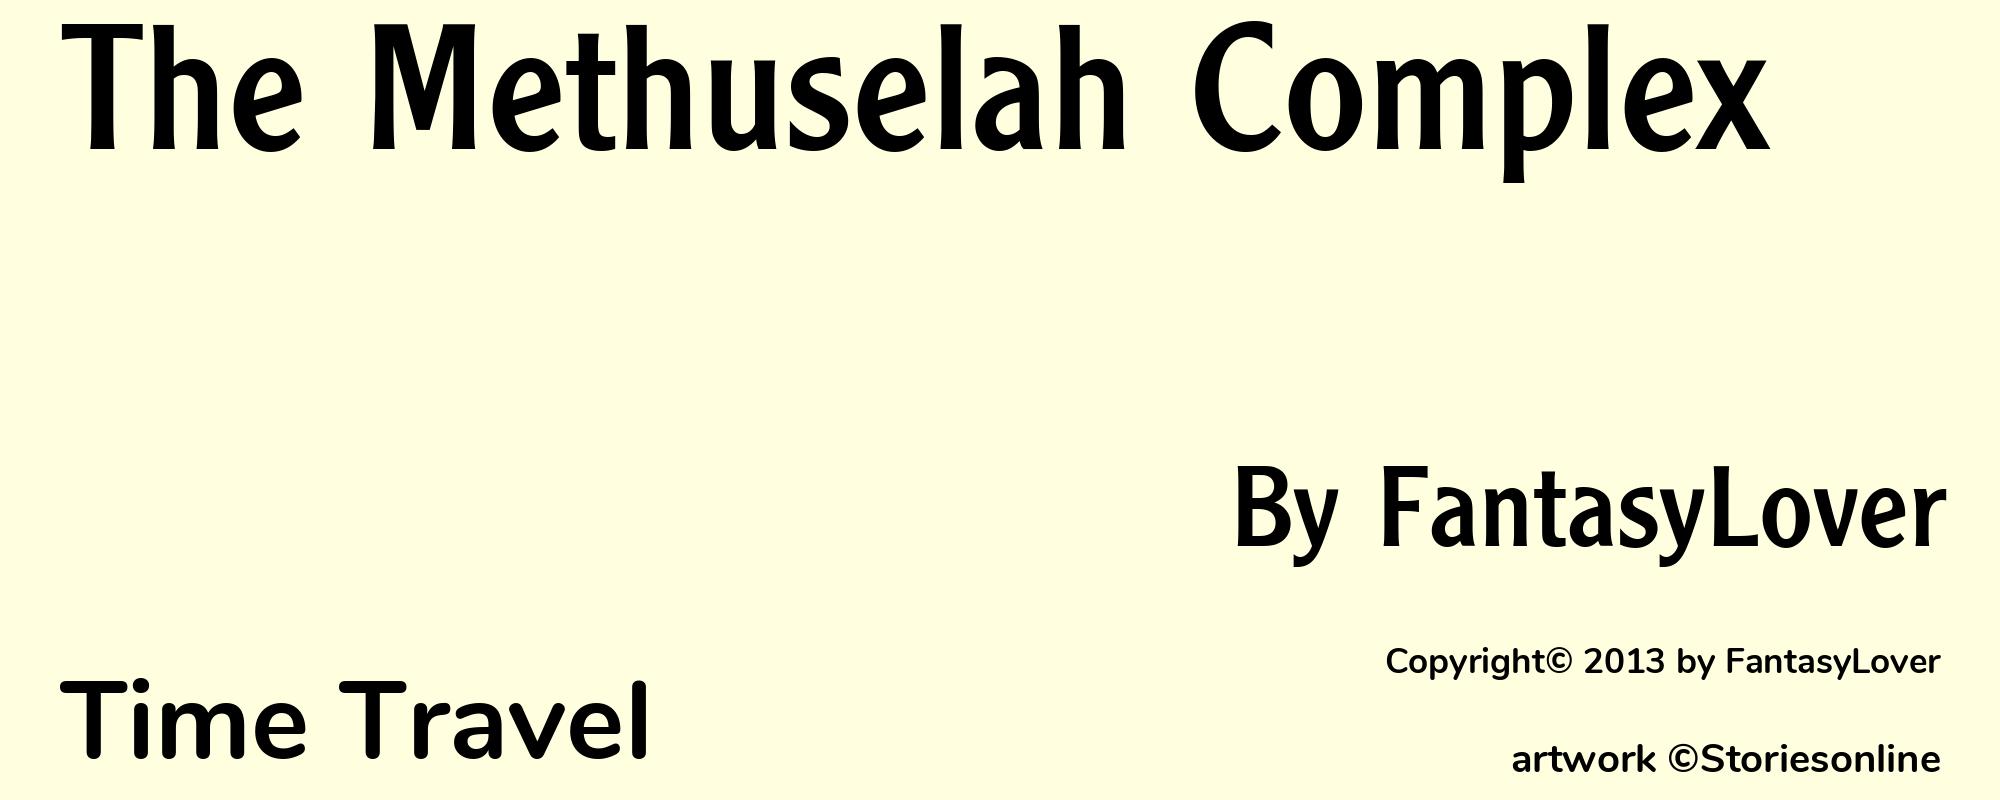 The Methuselah Complex - Cover